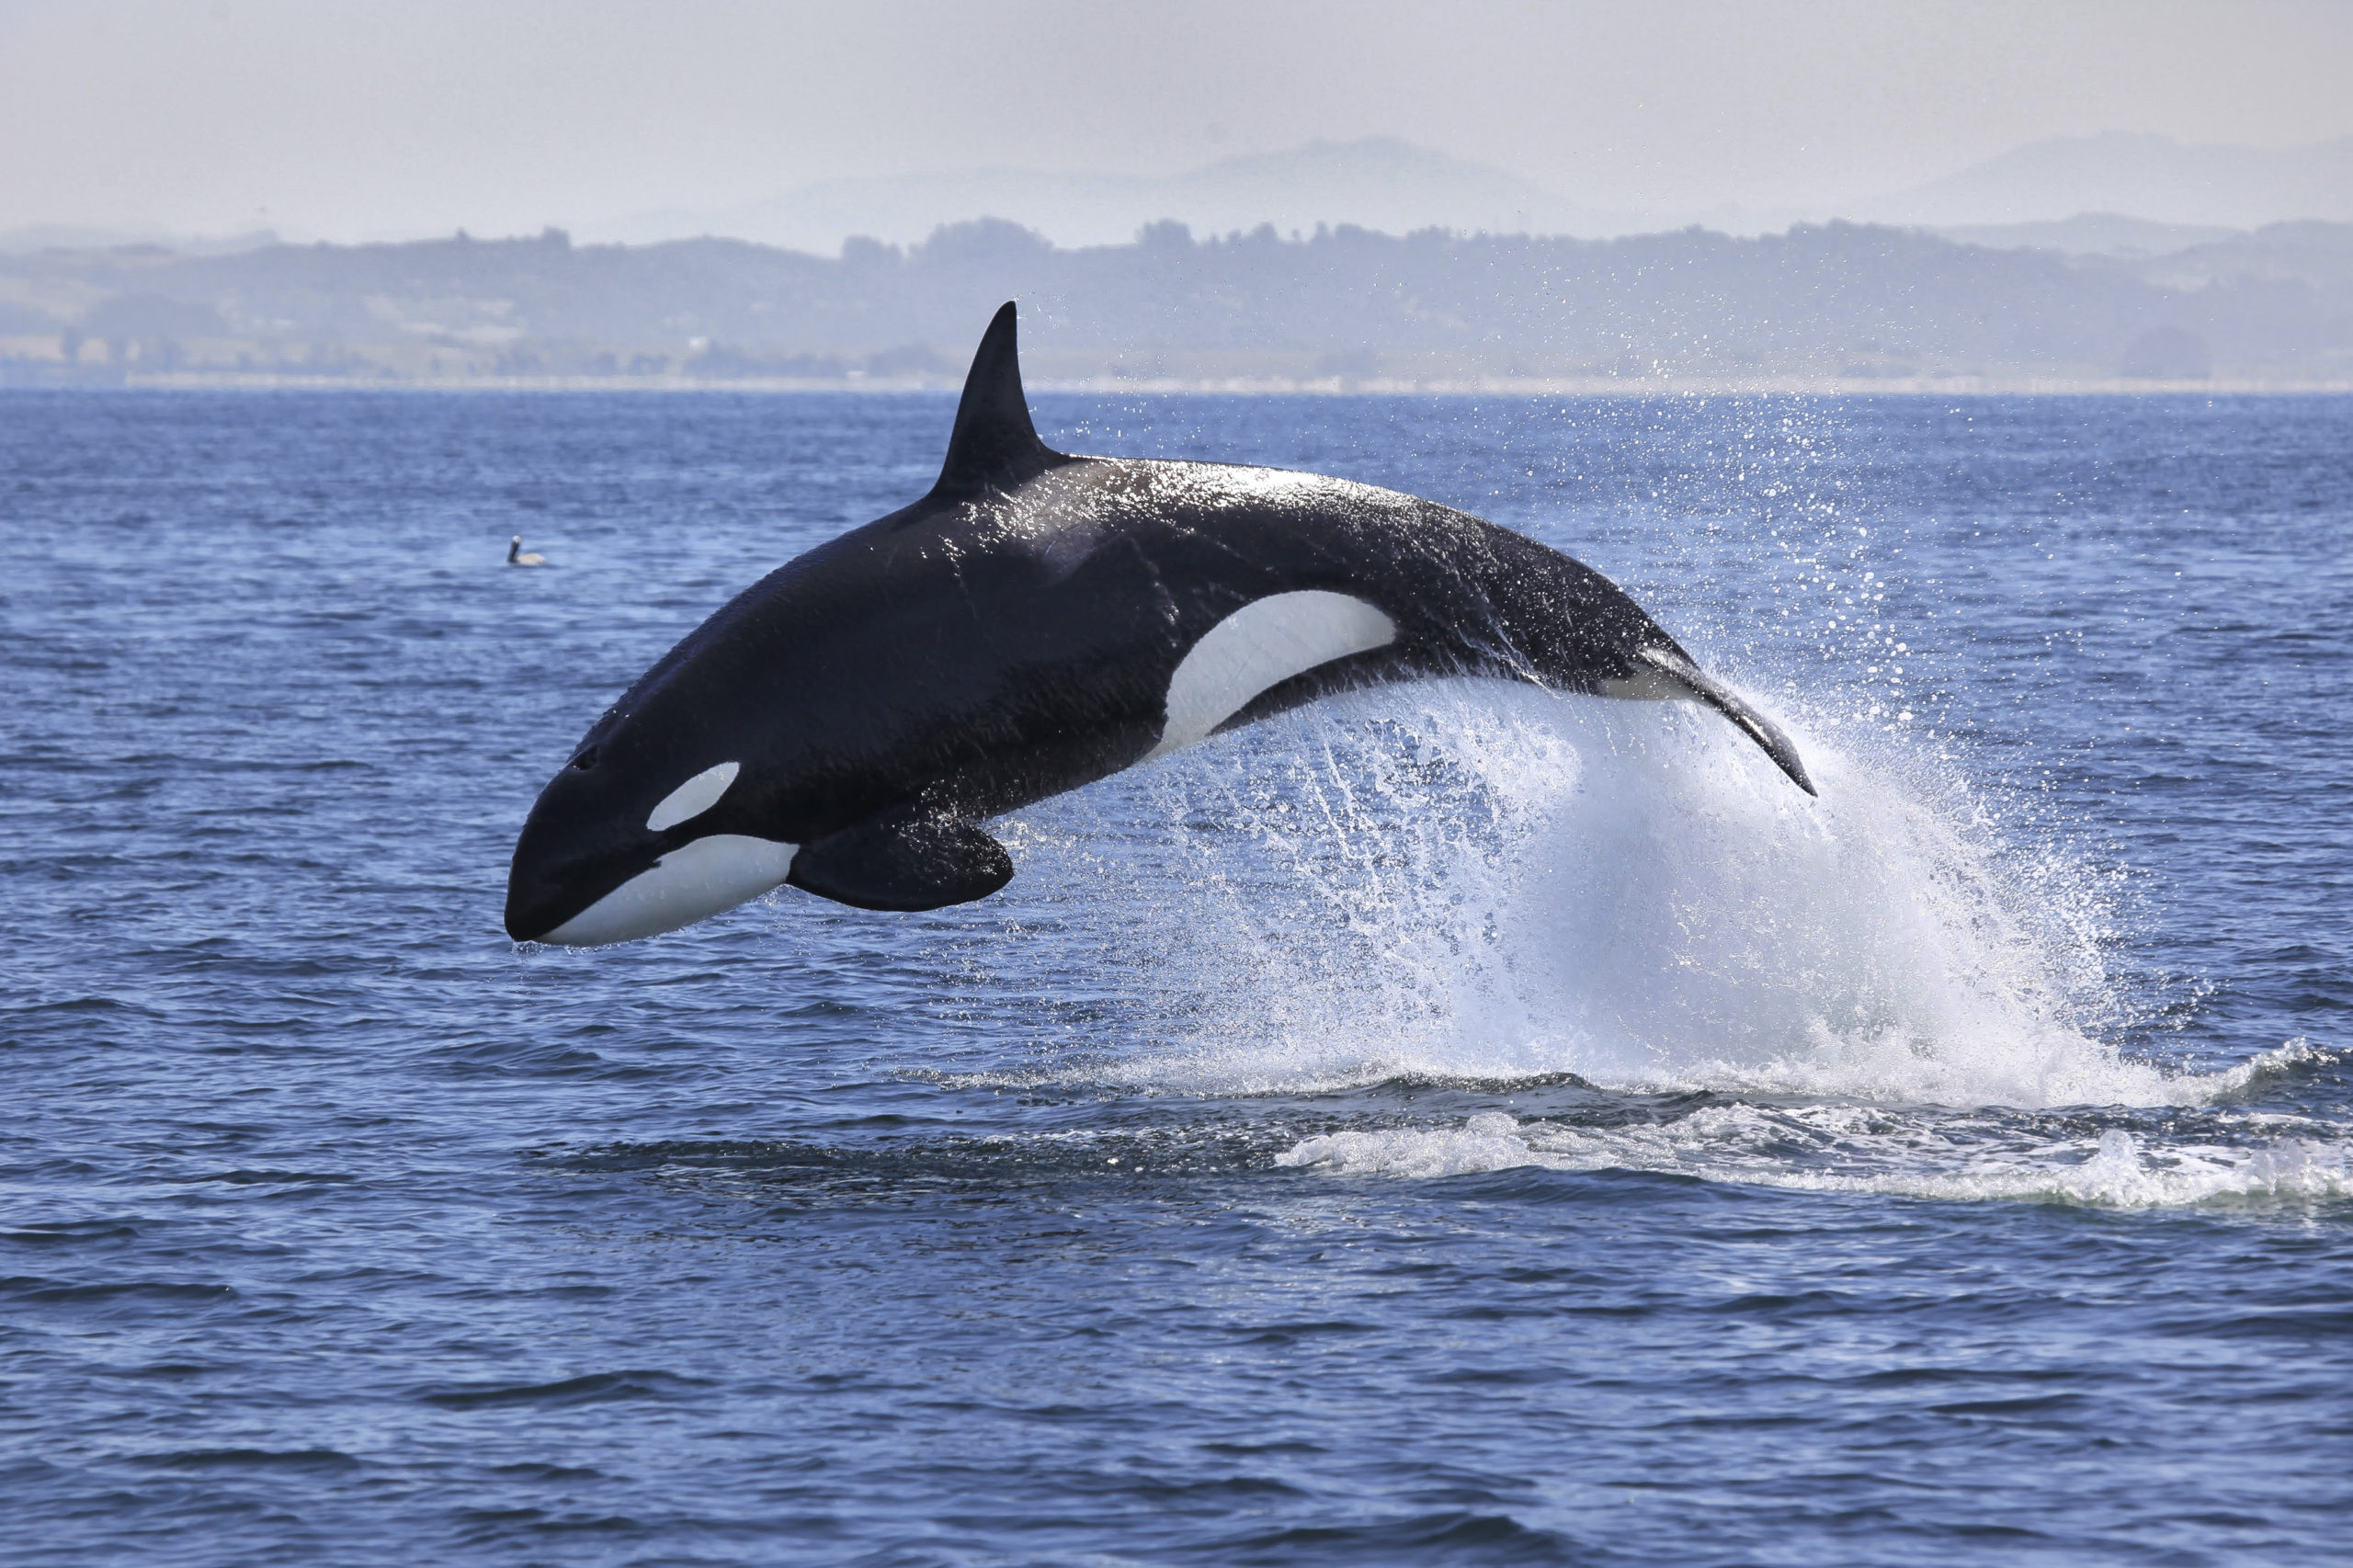 Southern Resident killer whale jumping out of water